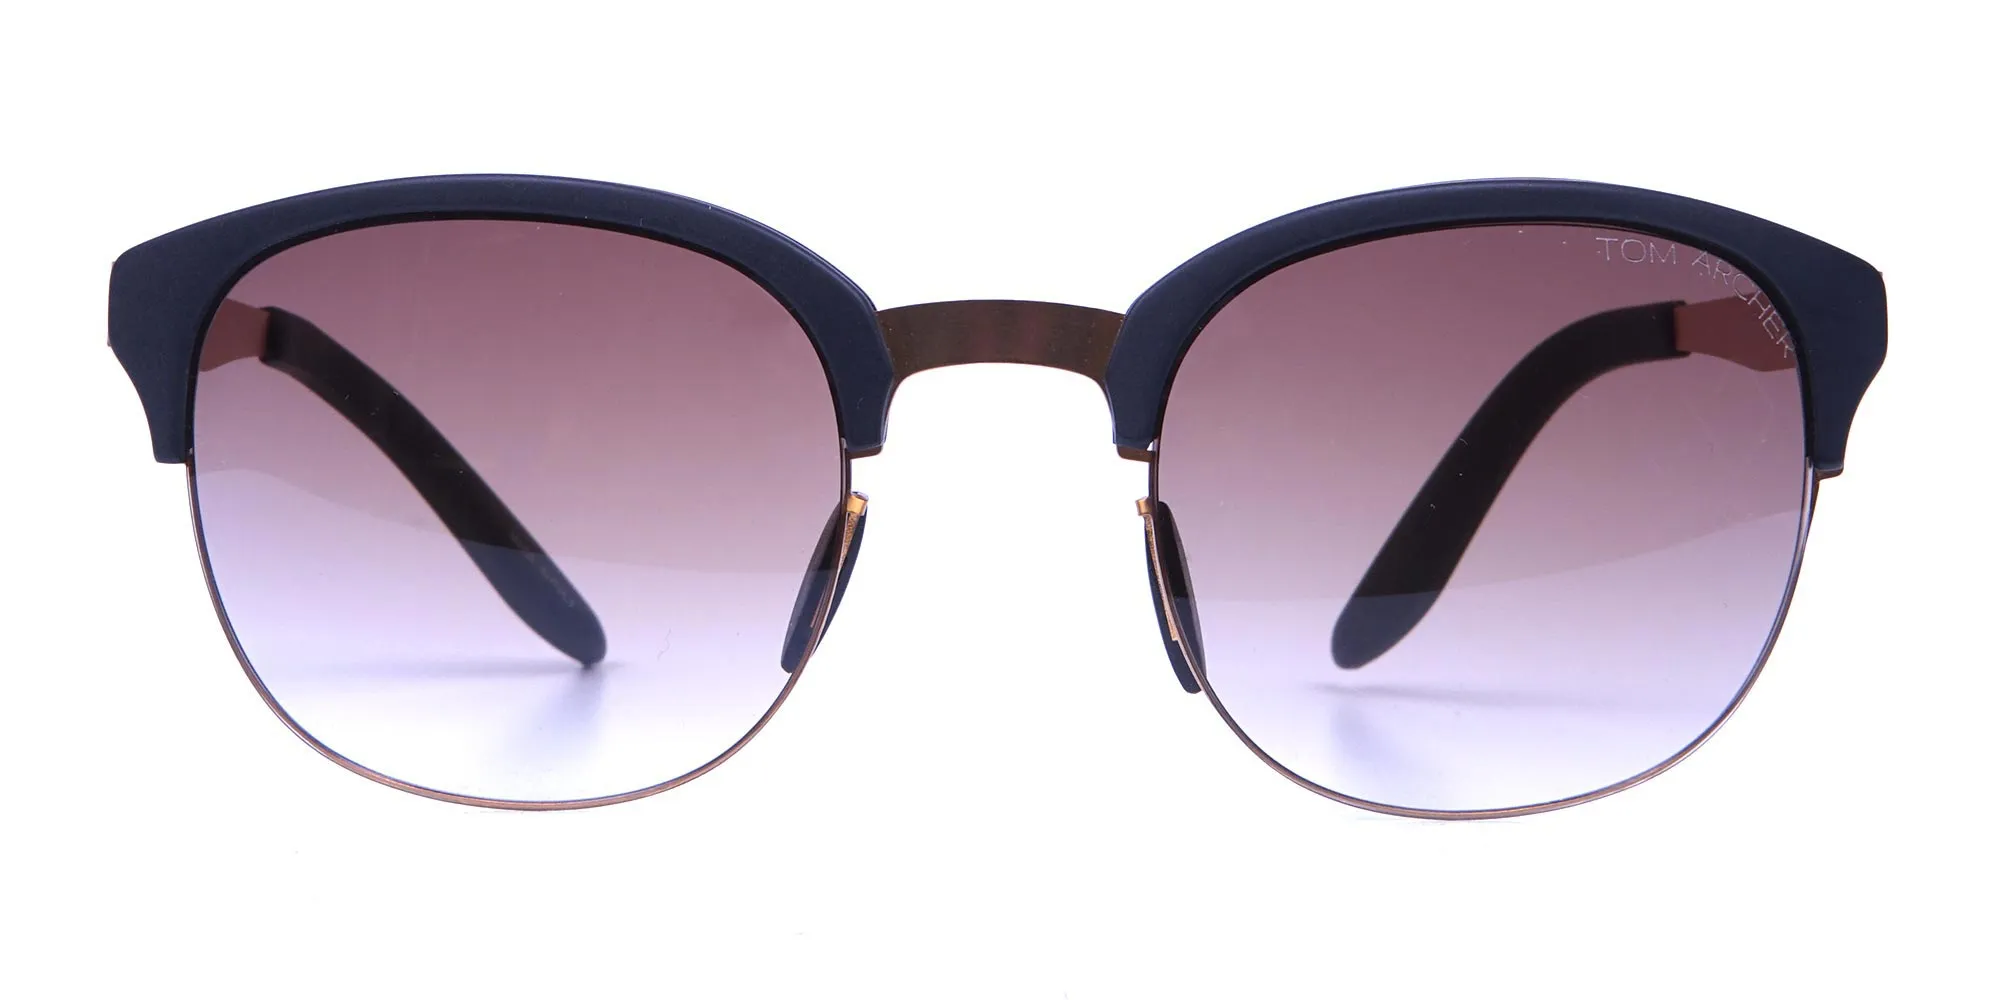 Gold Frame Sunglasses with Black Accents -1